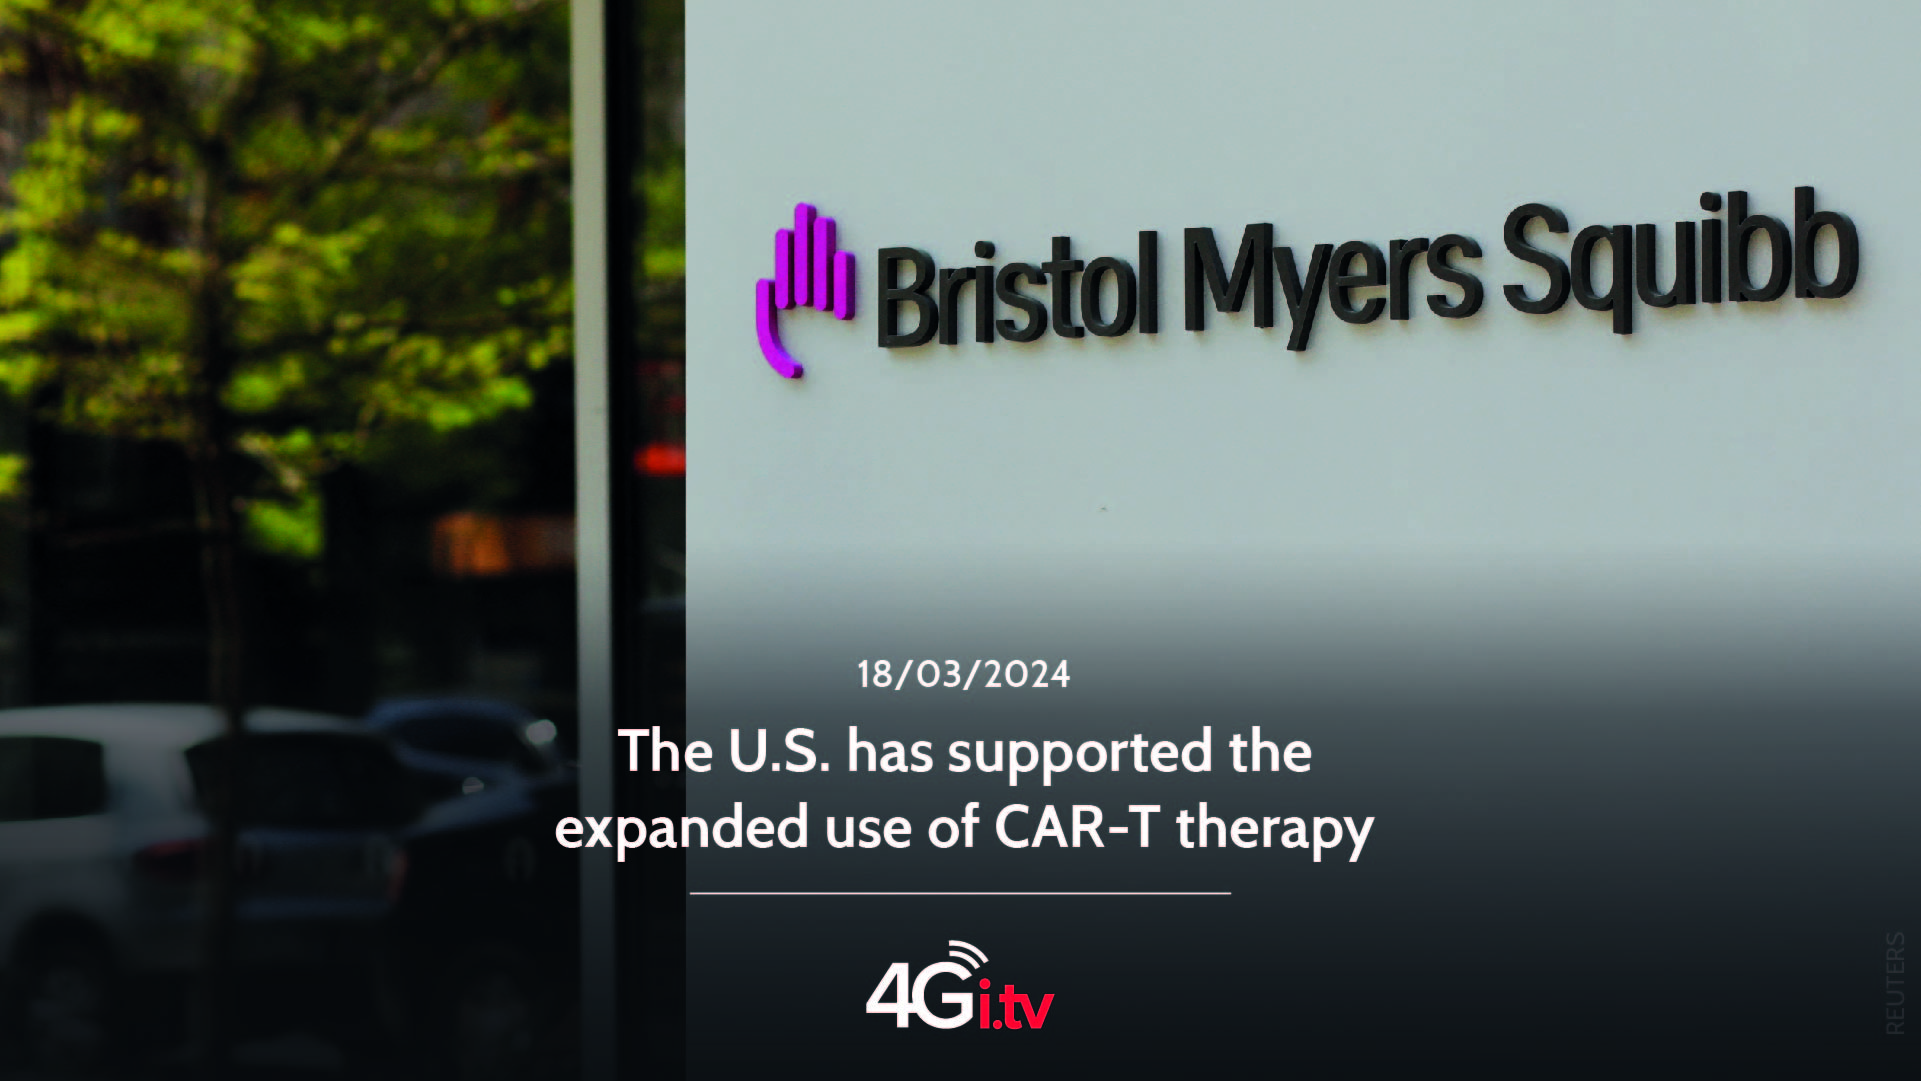 Подробнее о статье The U.S. has supported the expanded use of CAR-T therapy